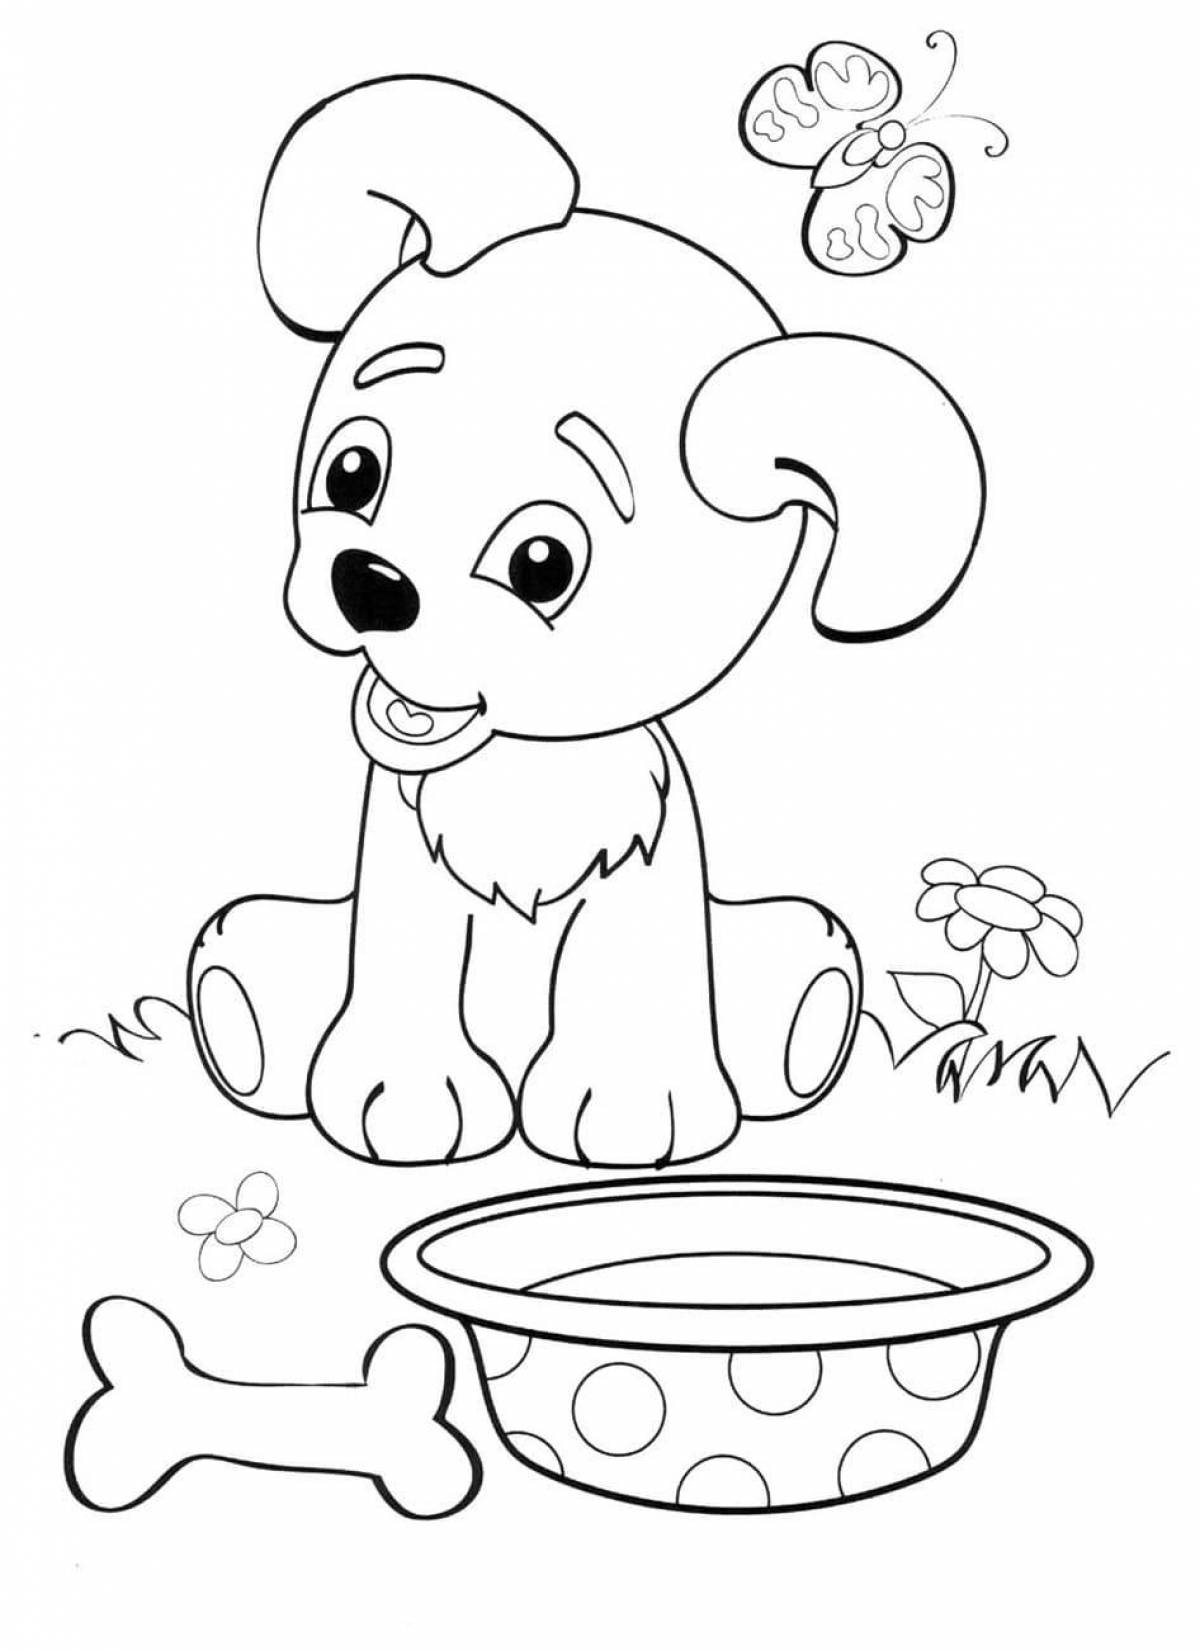 Cute dog coloring book for kids